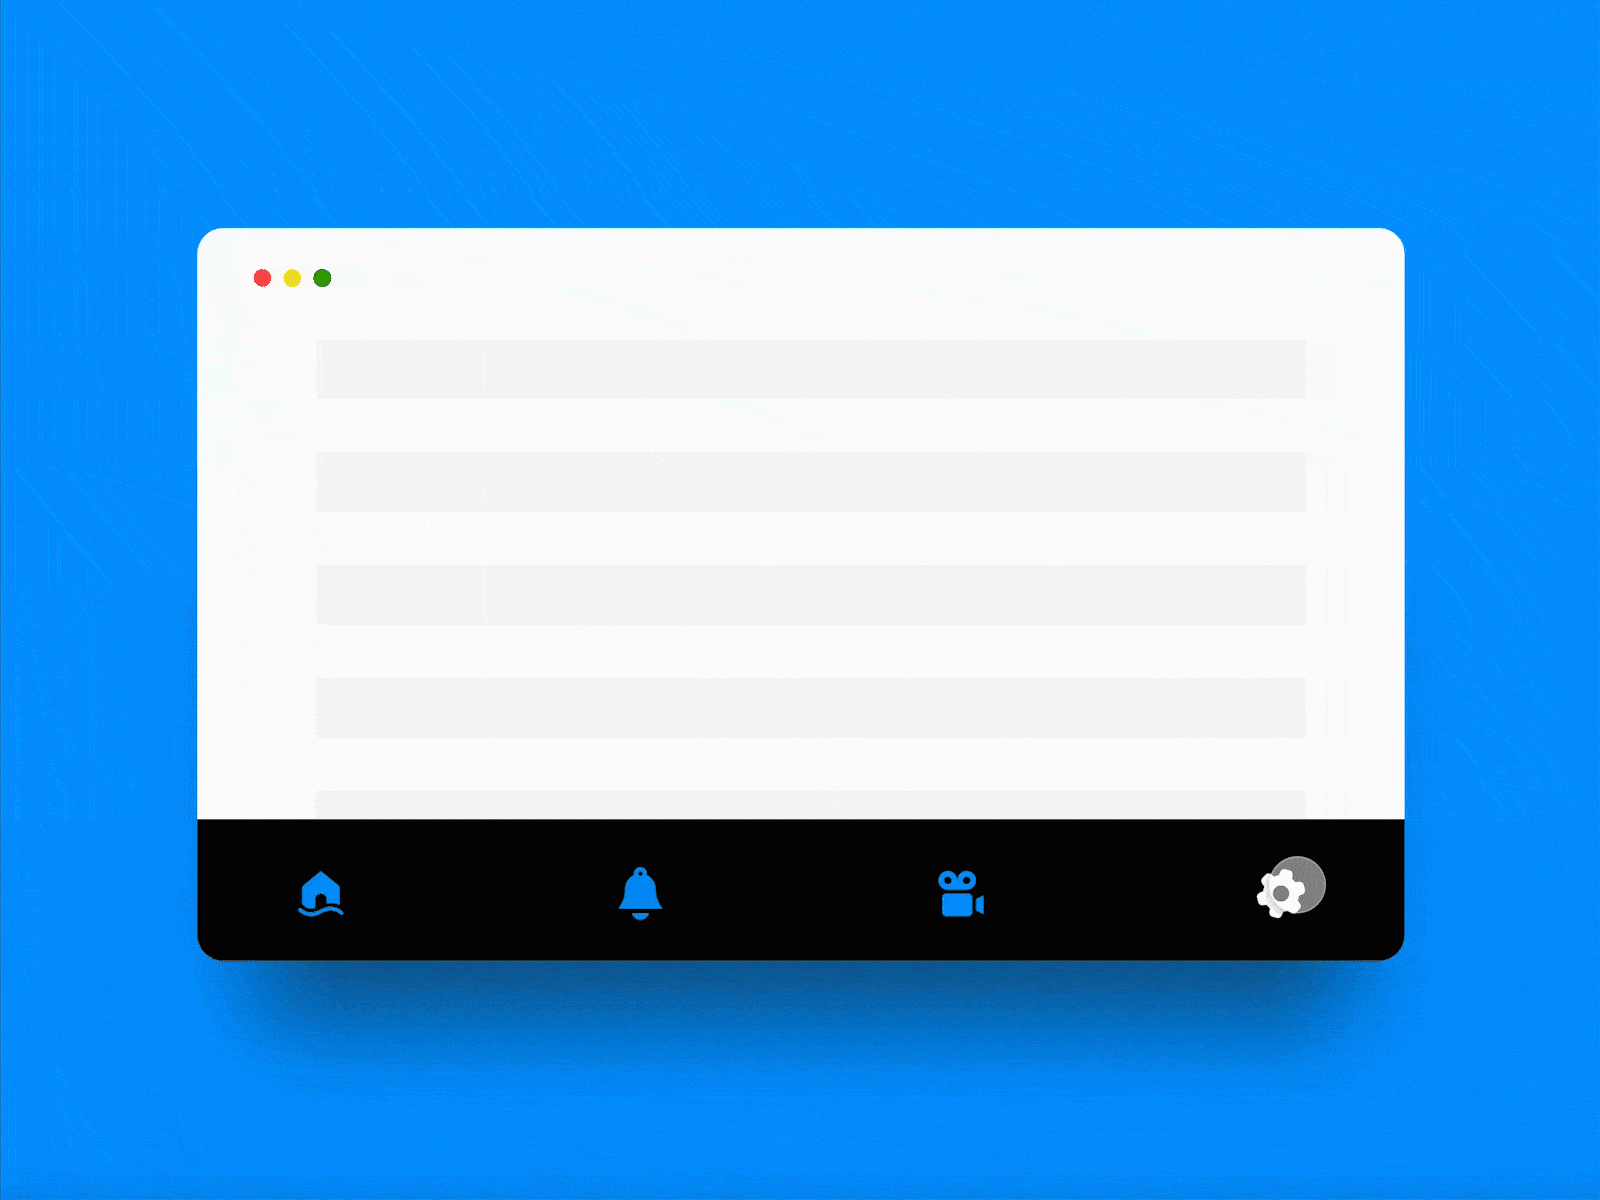 Components animation